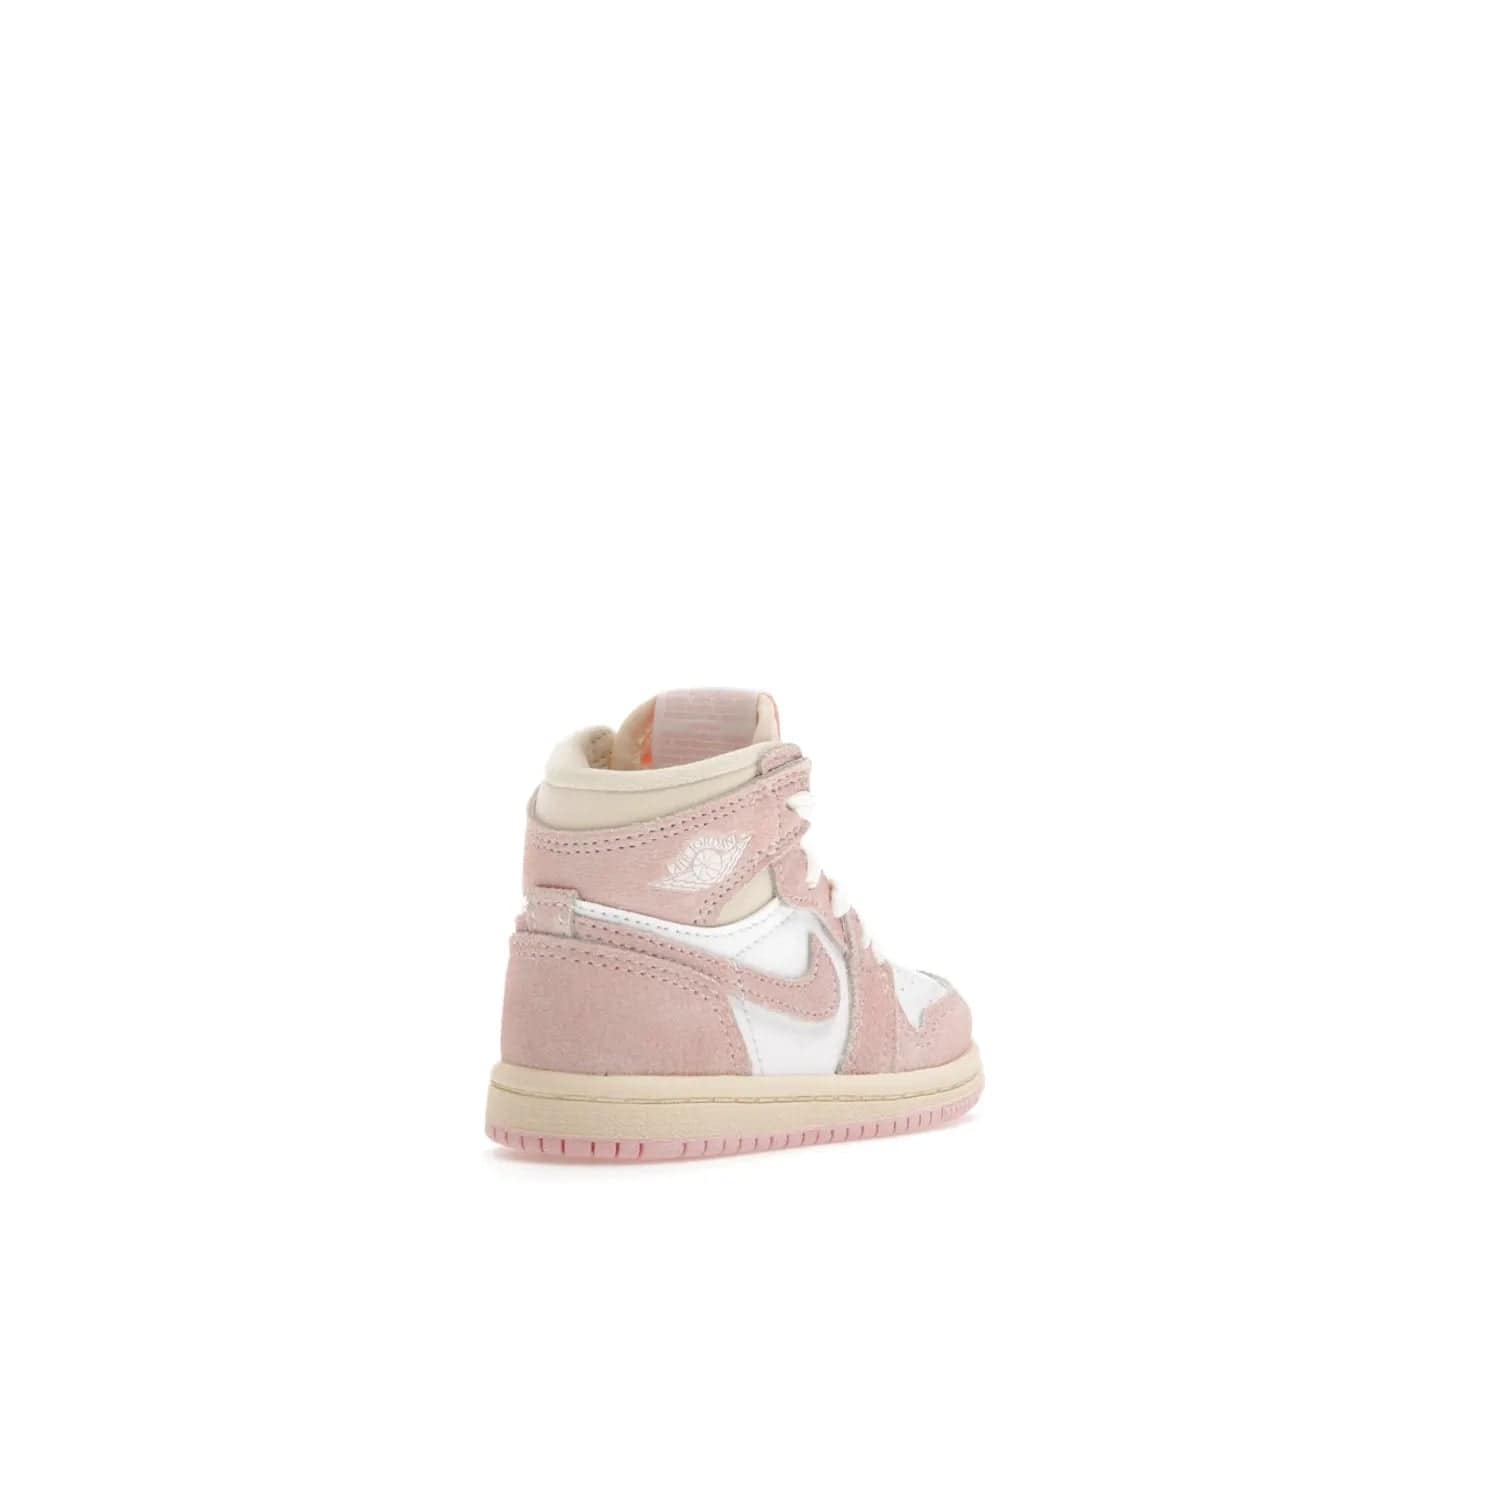 Jordan 1 Retro High OG Washed Pink (TD) - Image 32 - Only at www.BallersClubKickz.com - Retro style meets modern comfort: Introducing the Jordan 1 High OG Washed Pink (TD). Combining Atmosphere/White/Muslin/Sail colors with a high-rise silhouette, these shoes will be an instant classic when they release April 22, 2023.